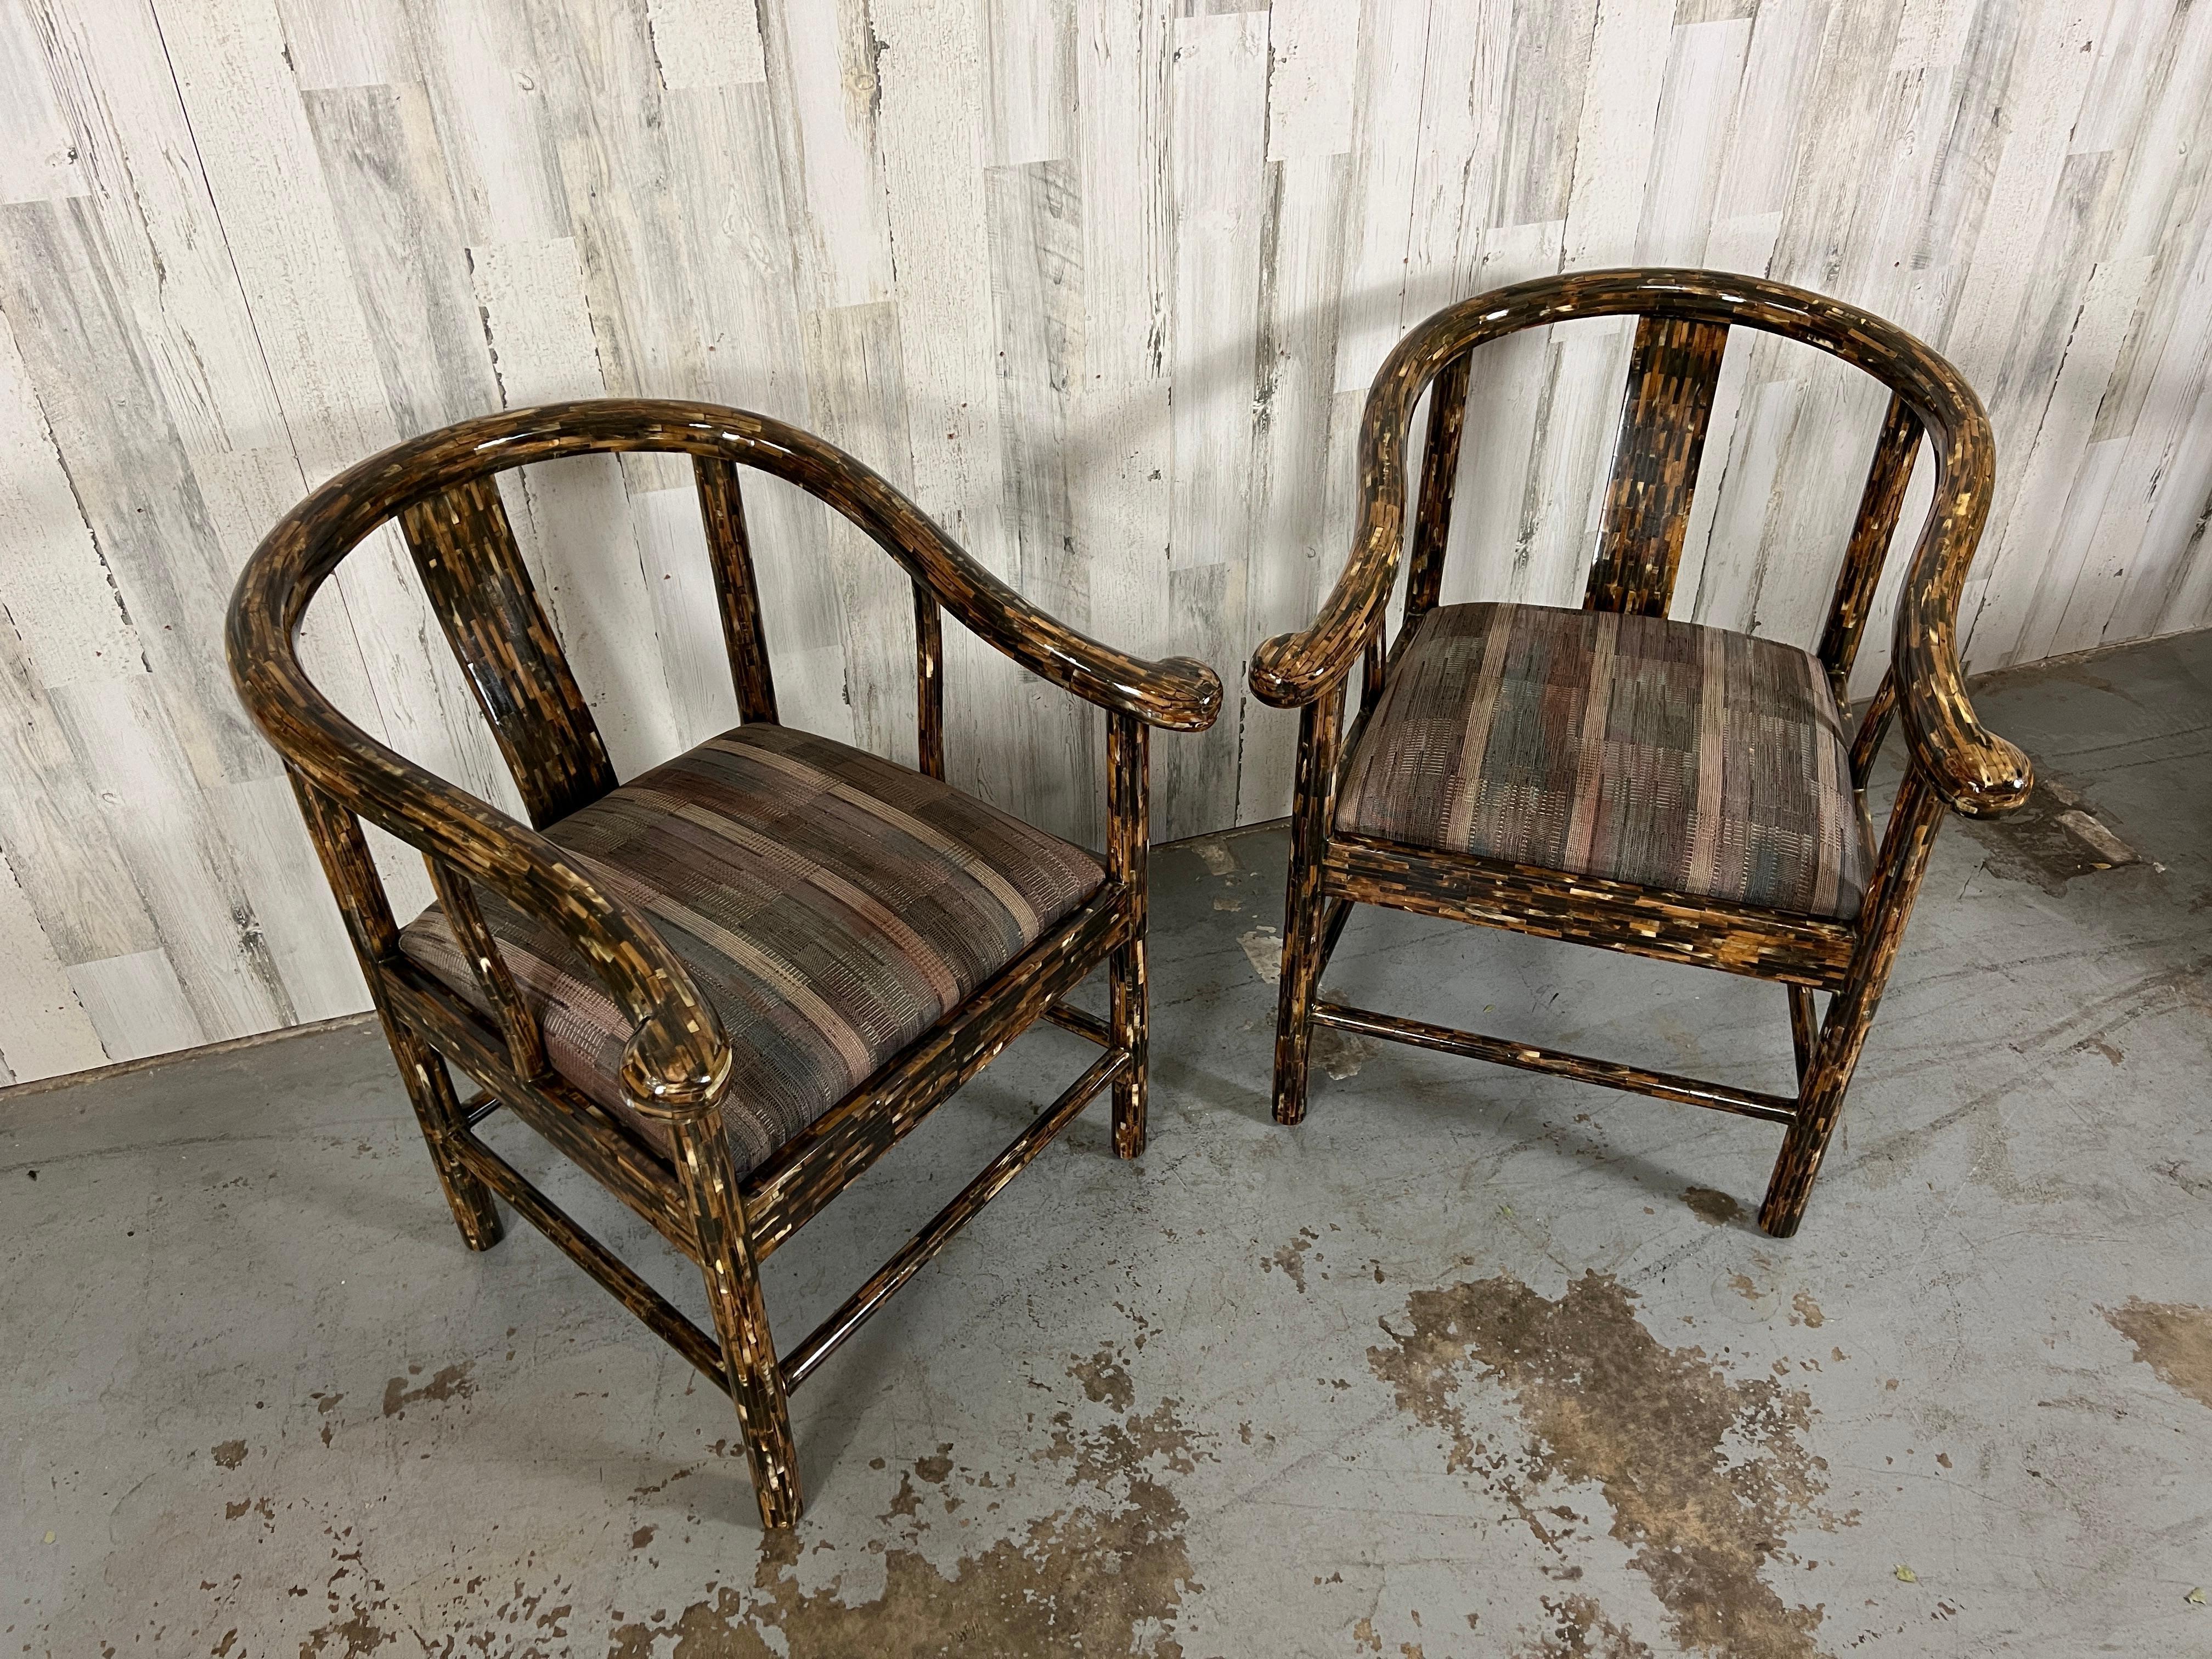 Enrique Garcel Tessellated Horn Dining Chairs. These chairs feature a horseshoe shape curved back with cushioned seats. This set is very rare to find. 